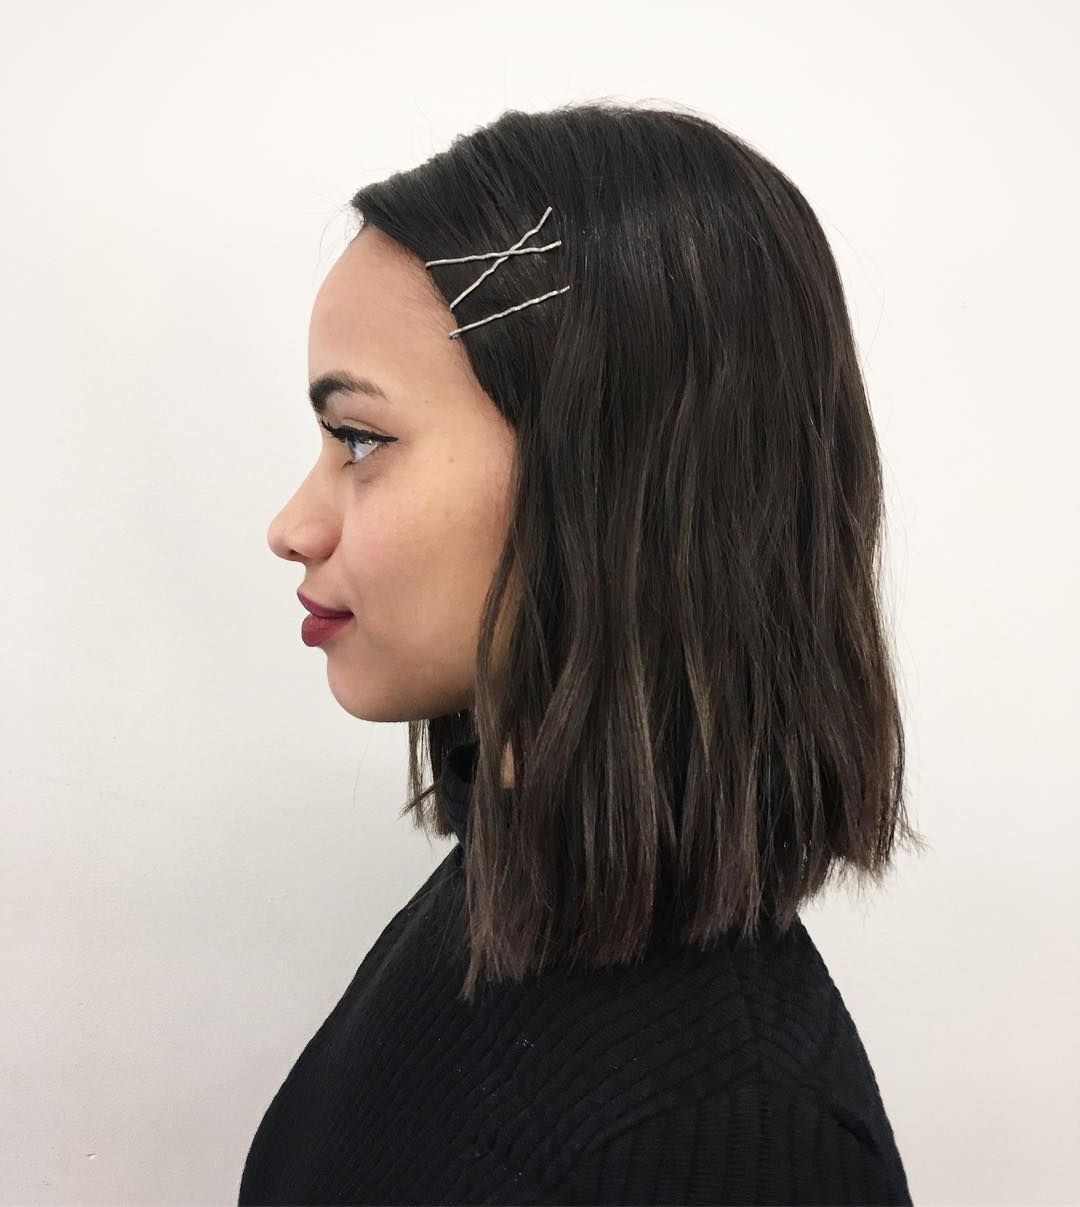 25 Bobby Pin Hairstyles You Haven't Tried But Should | Glamour Pertaining To Brush Up Hairstyles With Bobby Pins (View 8 of 25)